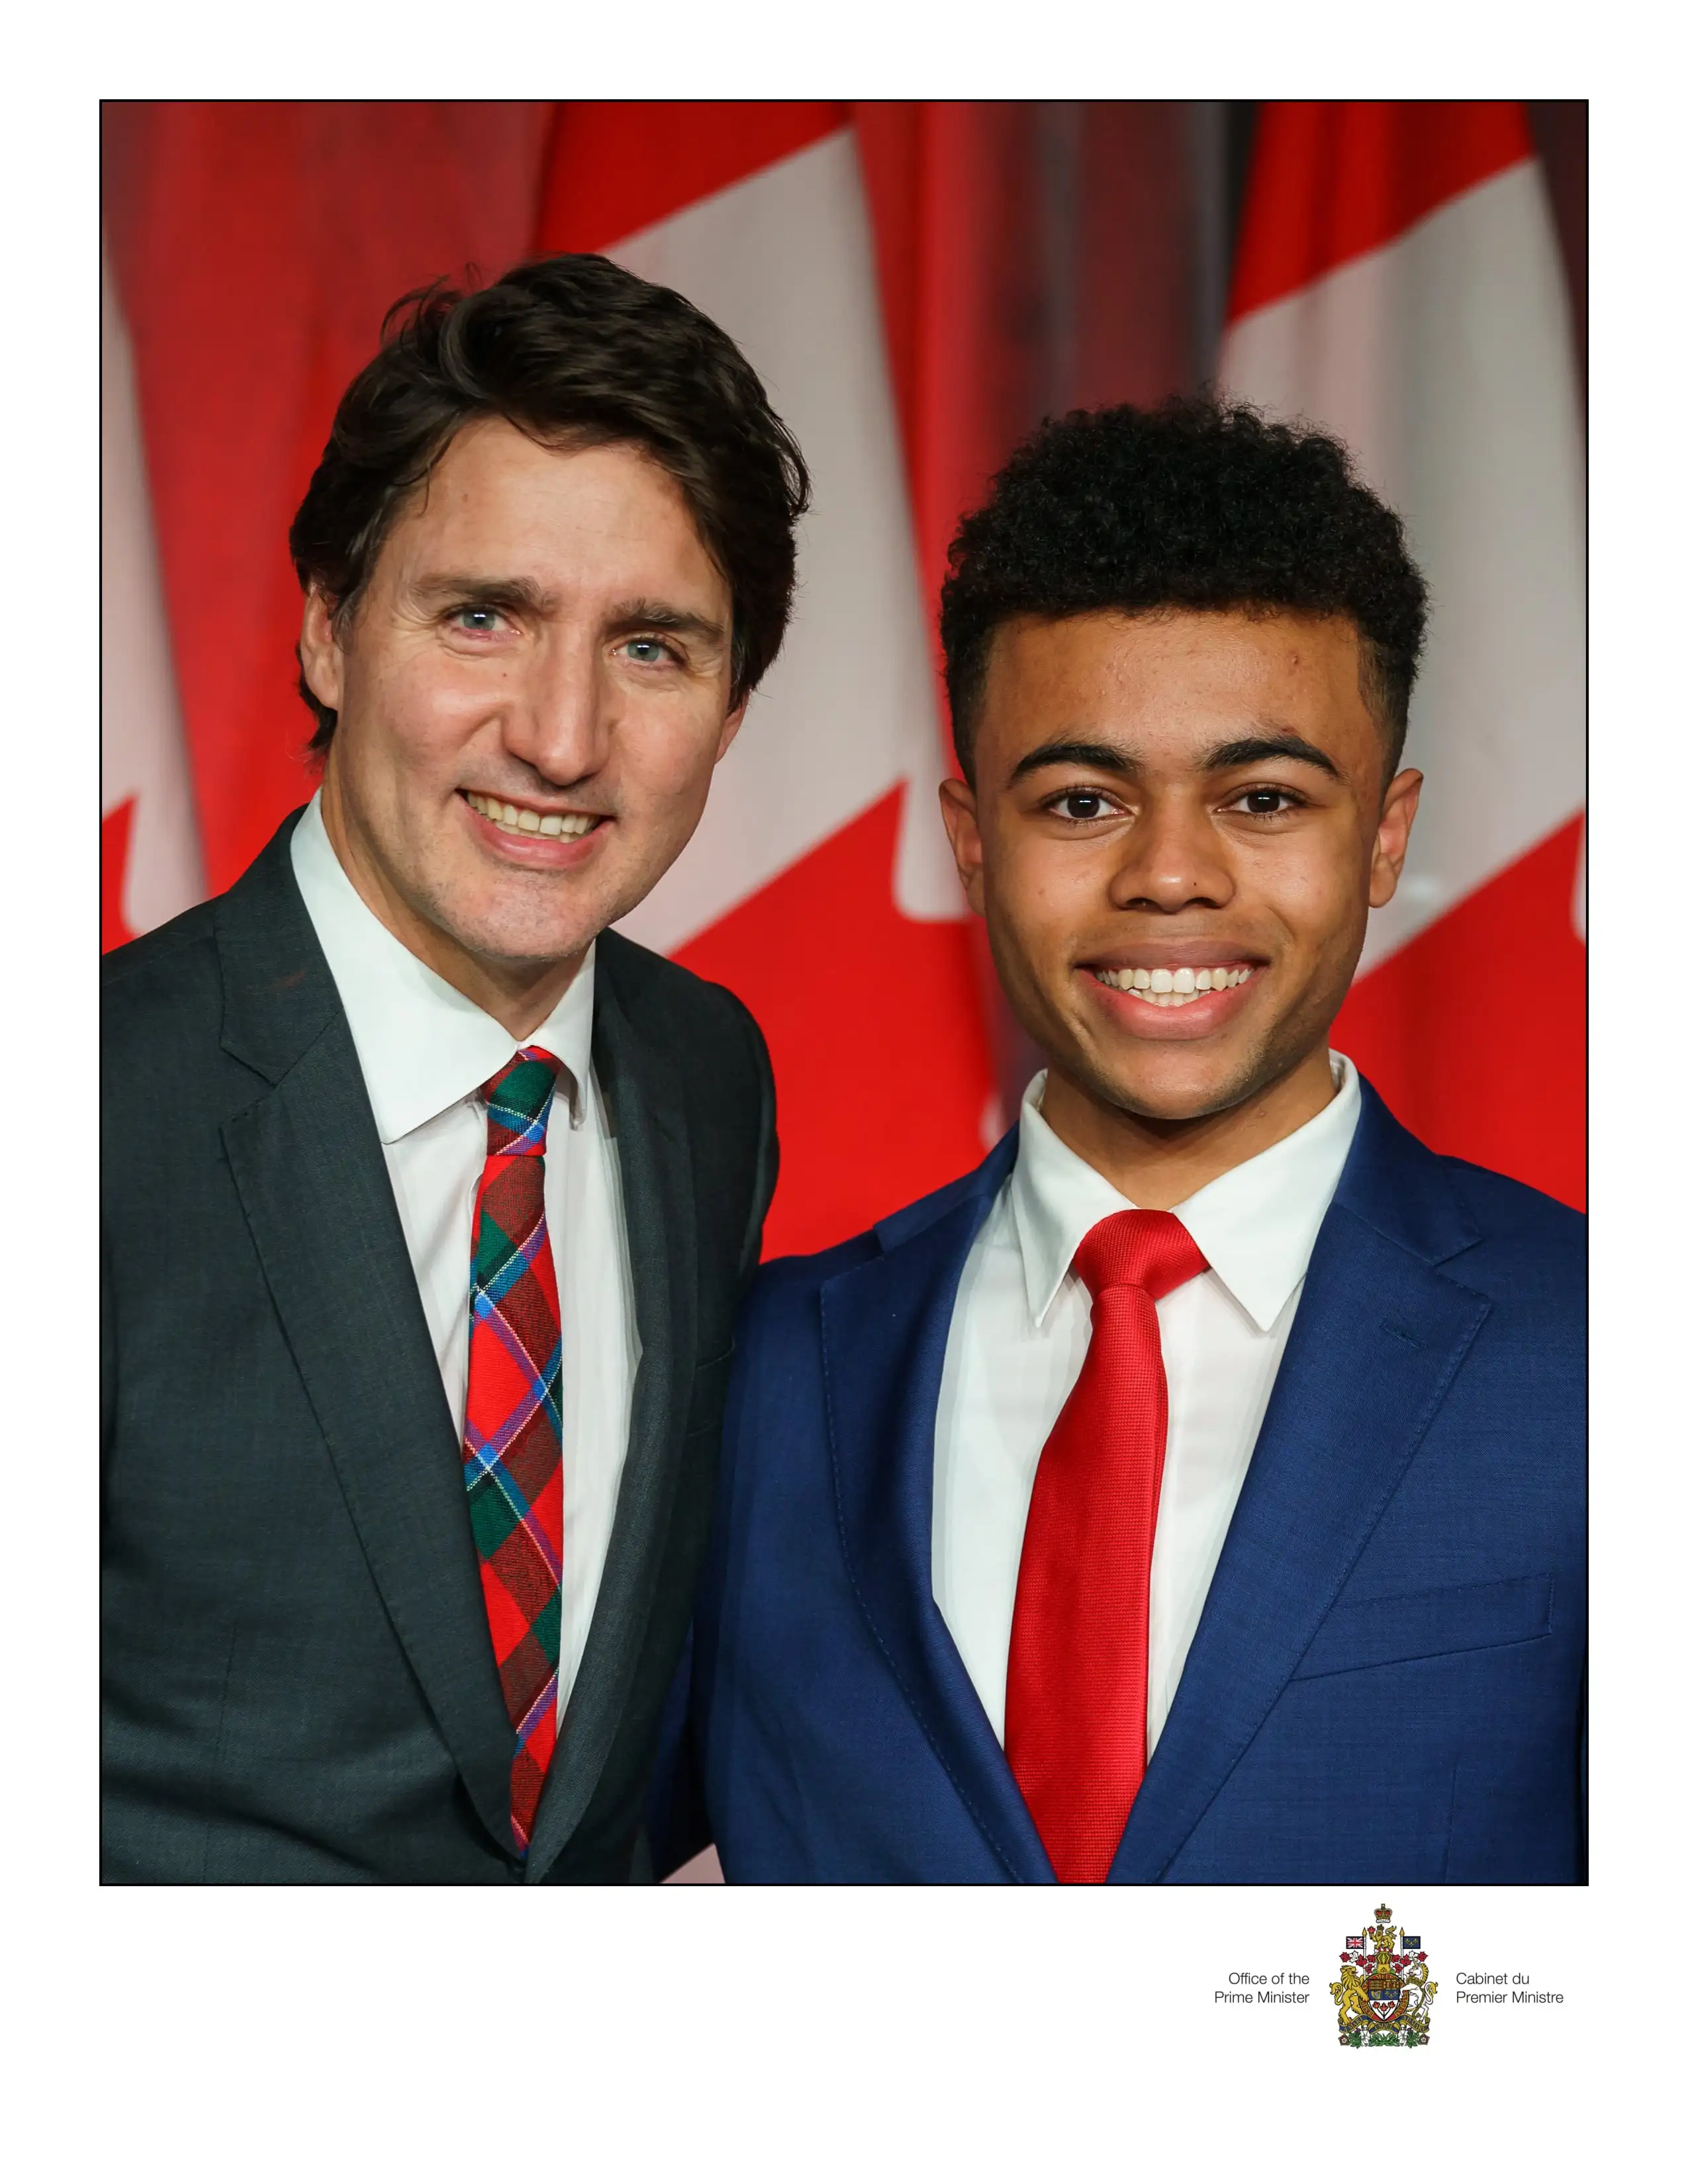 Ehab posing with Canadian Prime Minister Justin Trudeau.